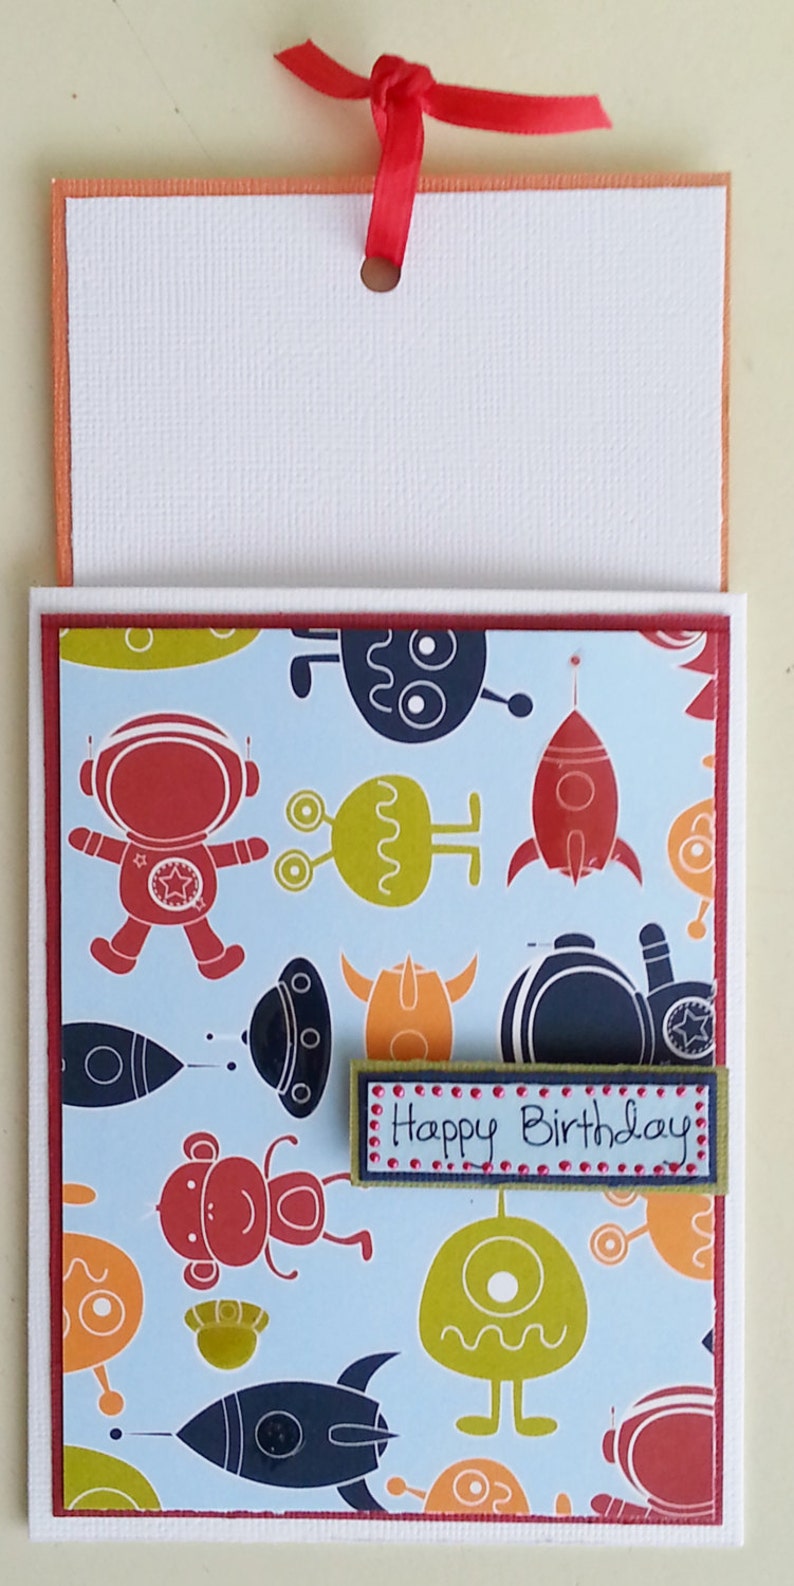 Kids Birthday Card. Handmade Card Alien, Outer Space theme. Ideal for Birthdays. Happy Birthday. Shipped using Sustainable Packaging image 4